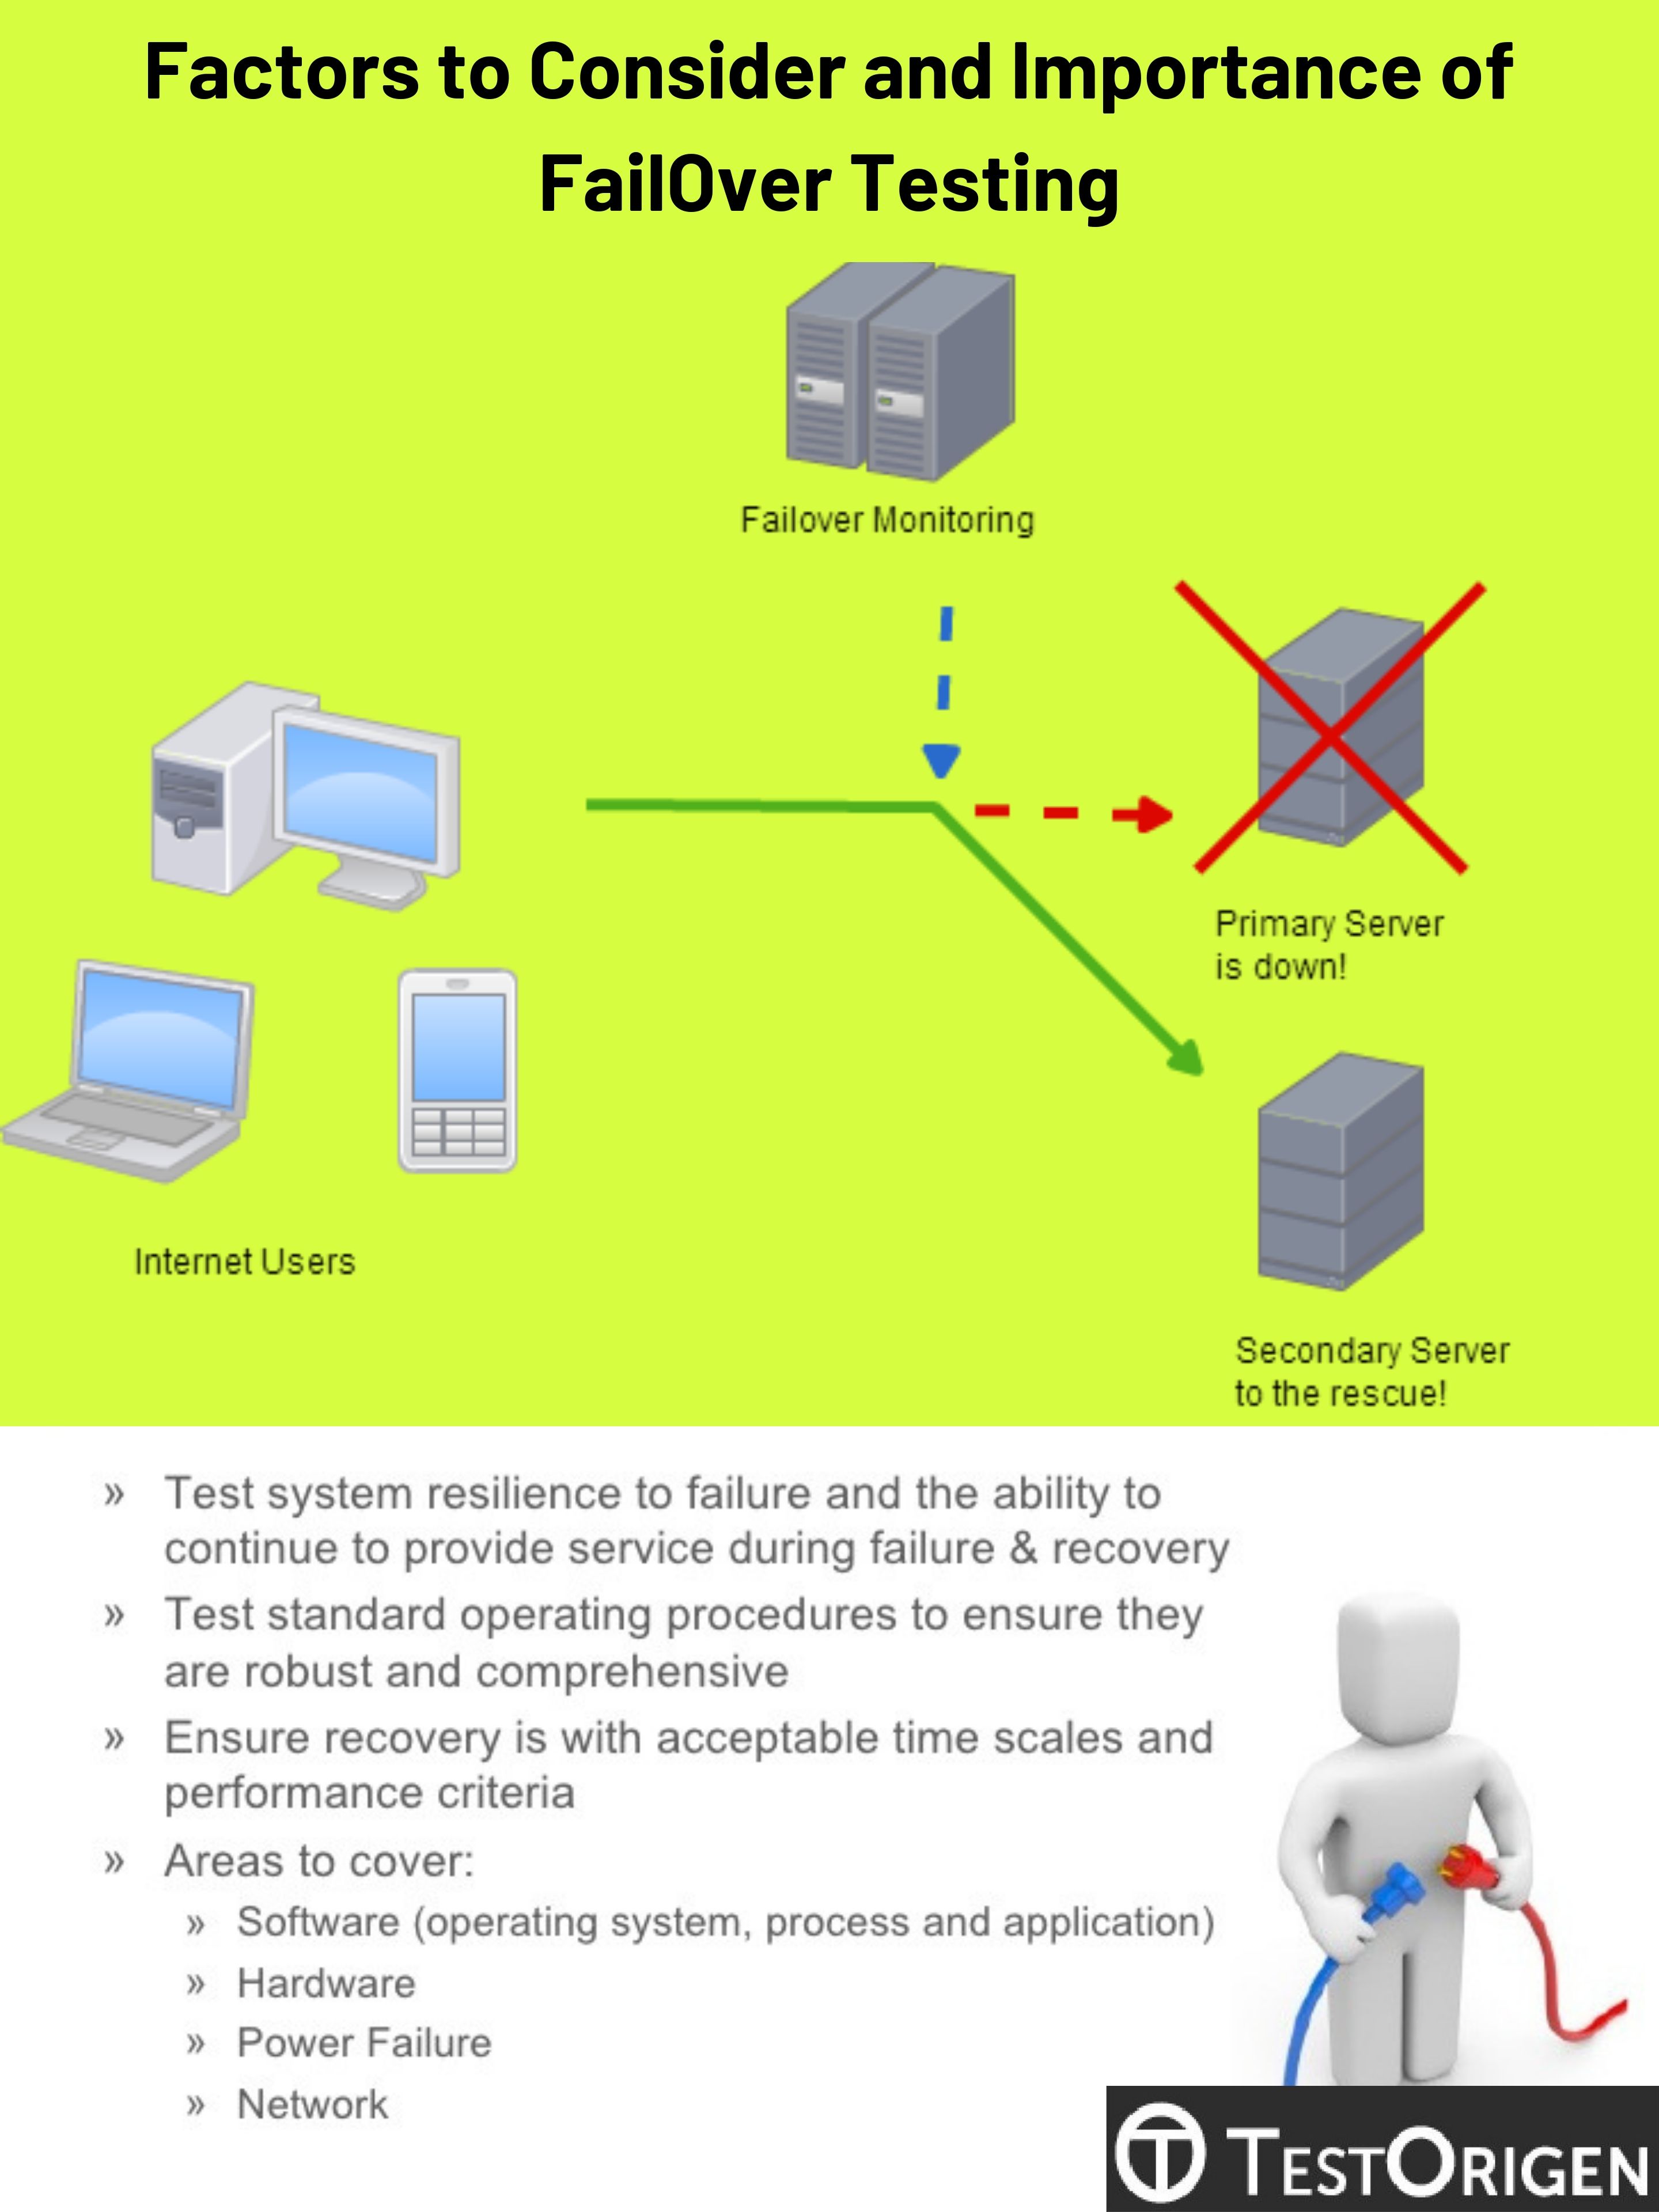 Factors to Consider and Importance of FailOver Testing